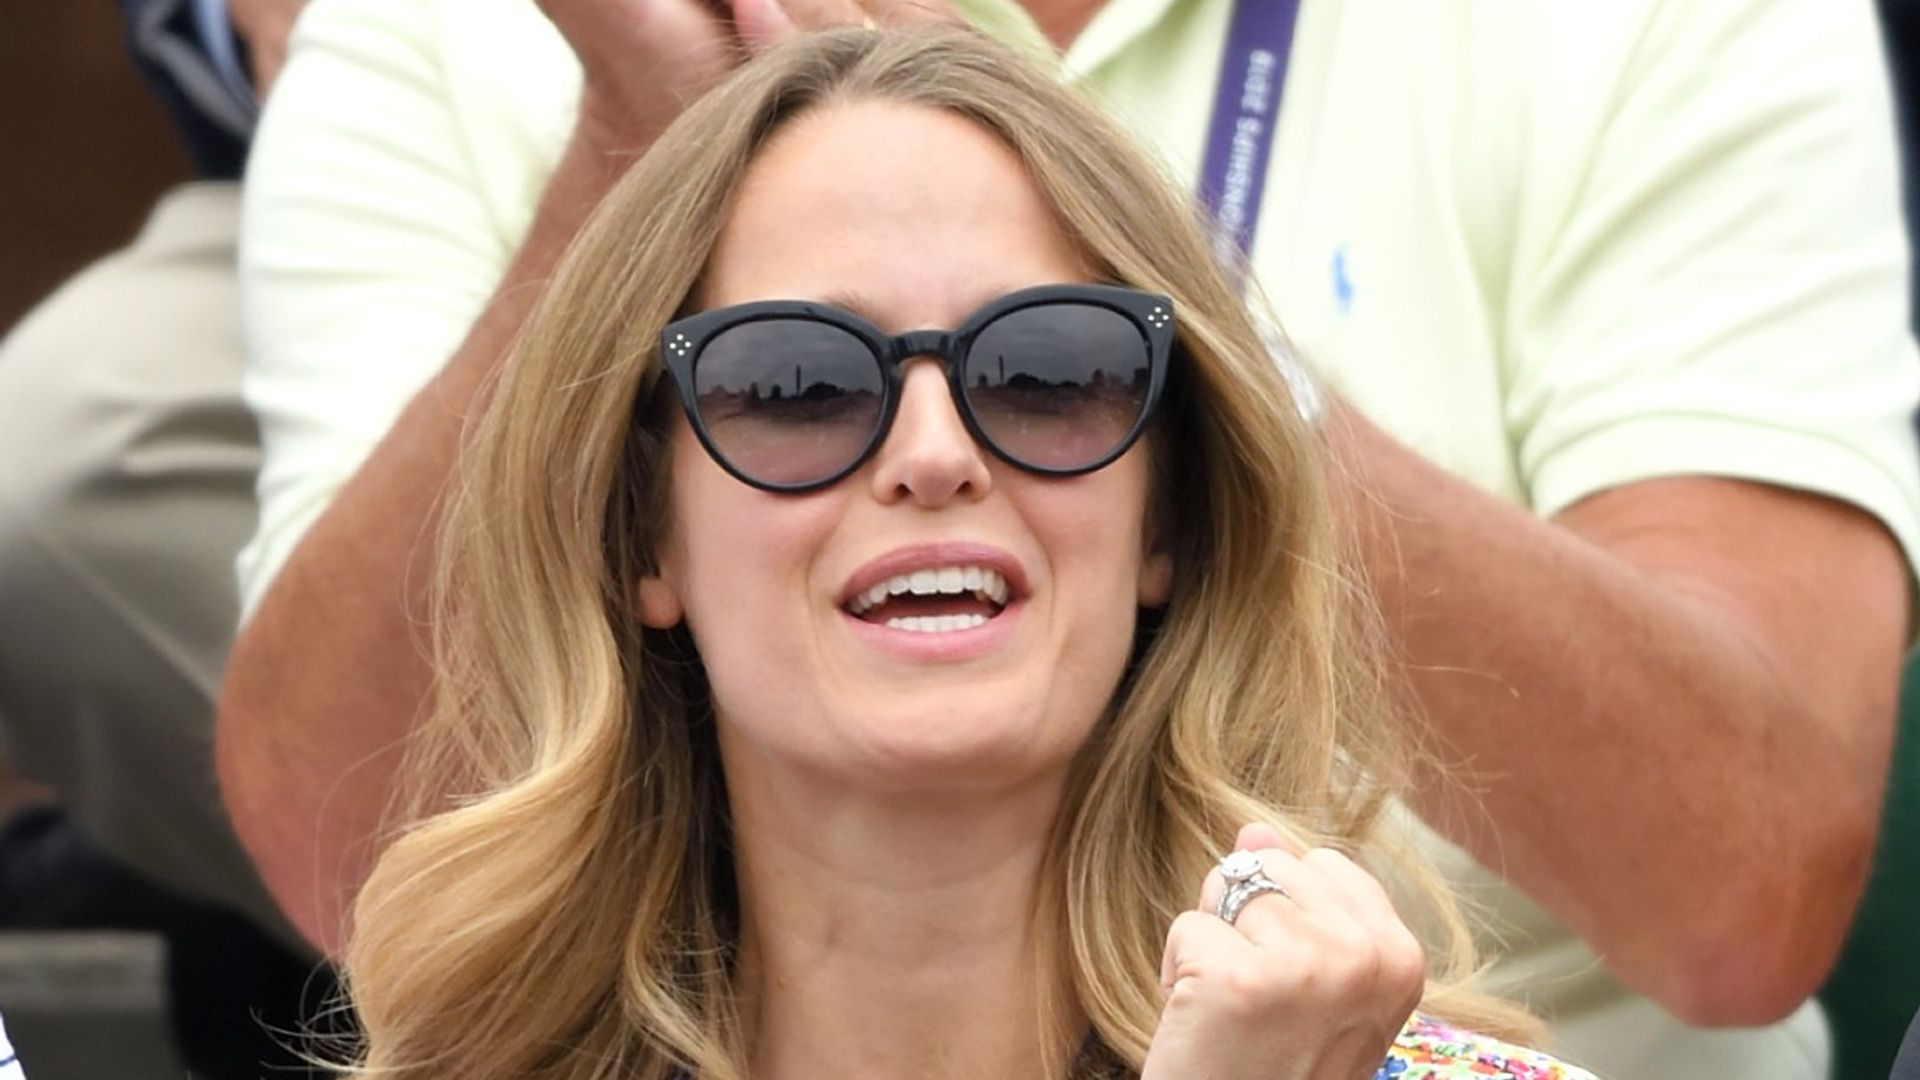 Kim Sears experiences rollercoaster of emotions as she cheers on husband Andy Murray at Wimbledon